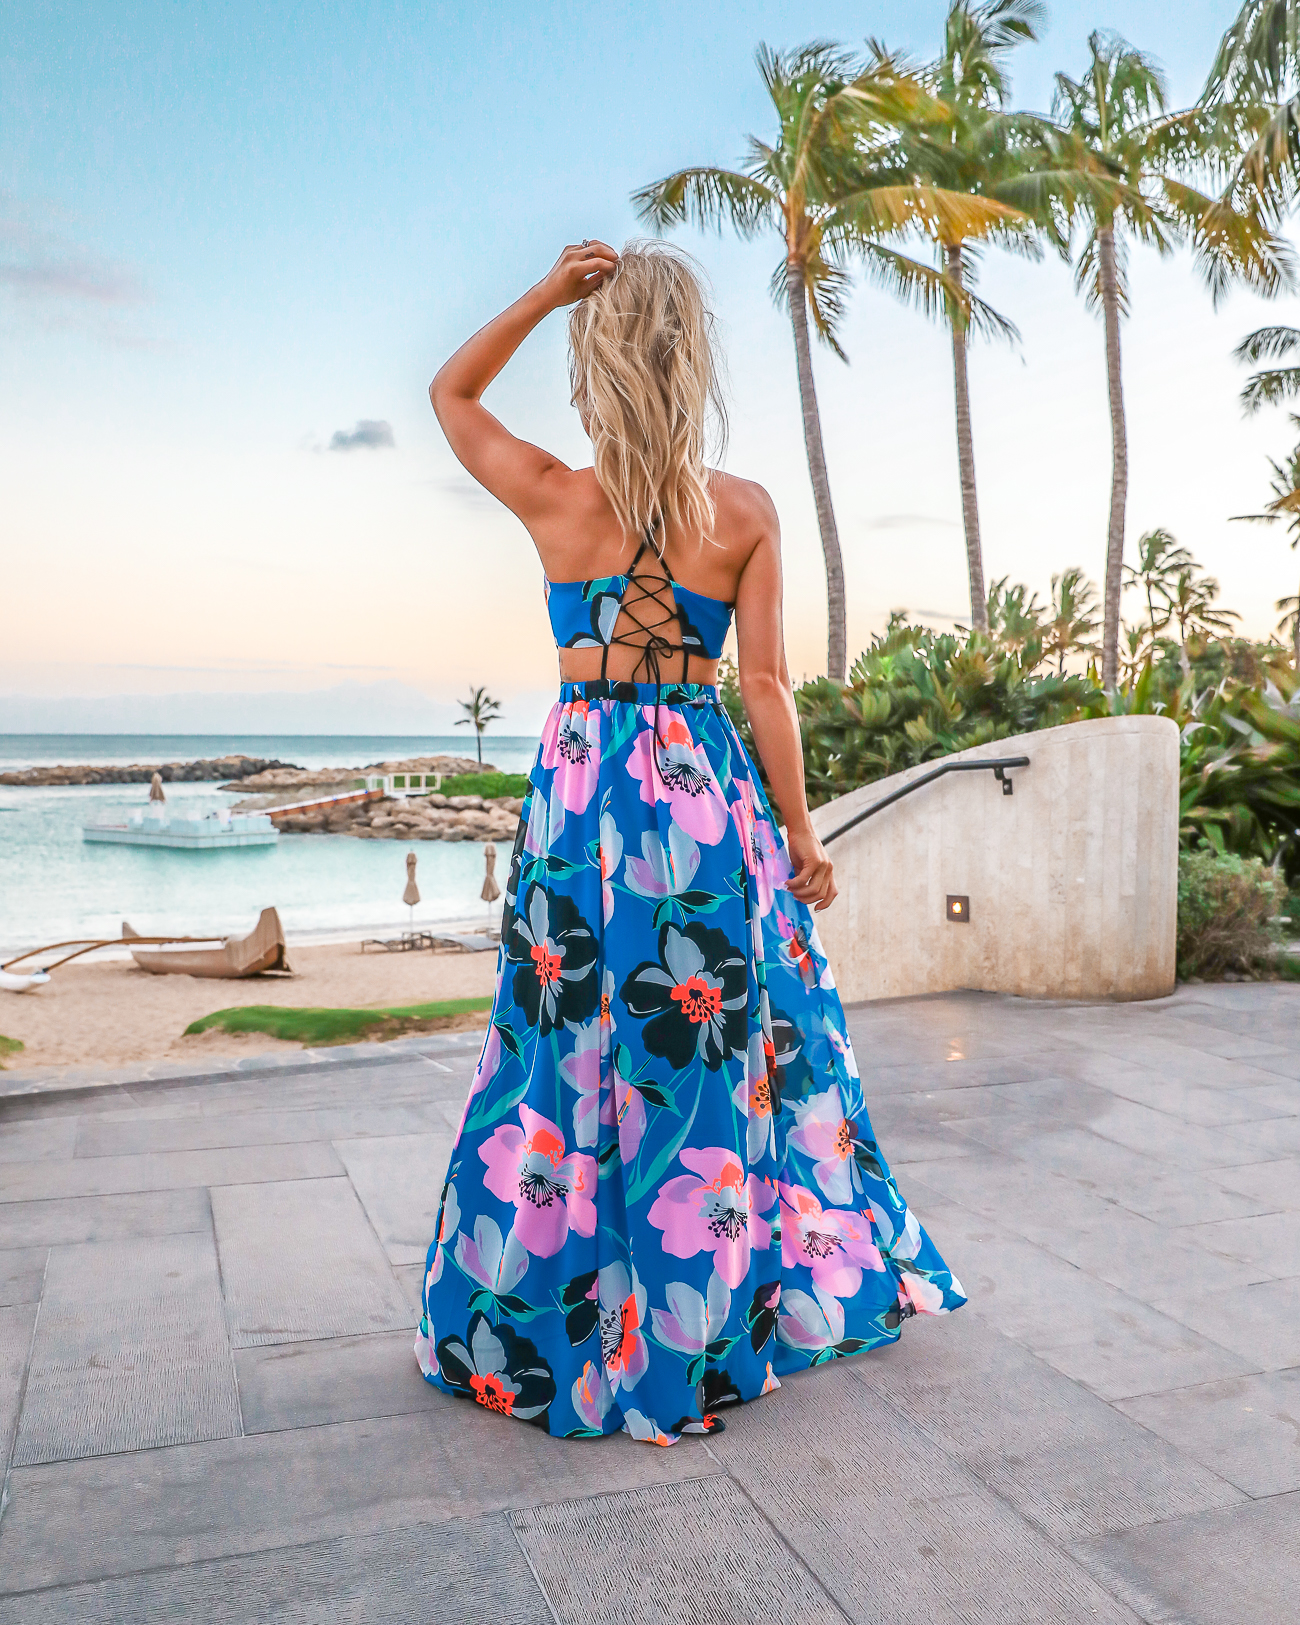 Express Blue Tropical Maxi Dress Vacation Outfit Idea Four Season Oahu Hawaii Outfit Laura Beverlin 30th Birthday-2